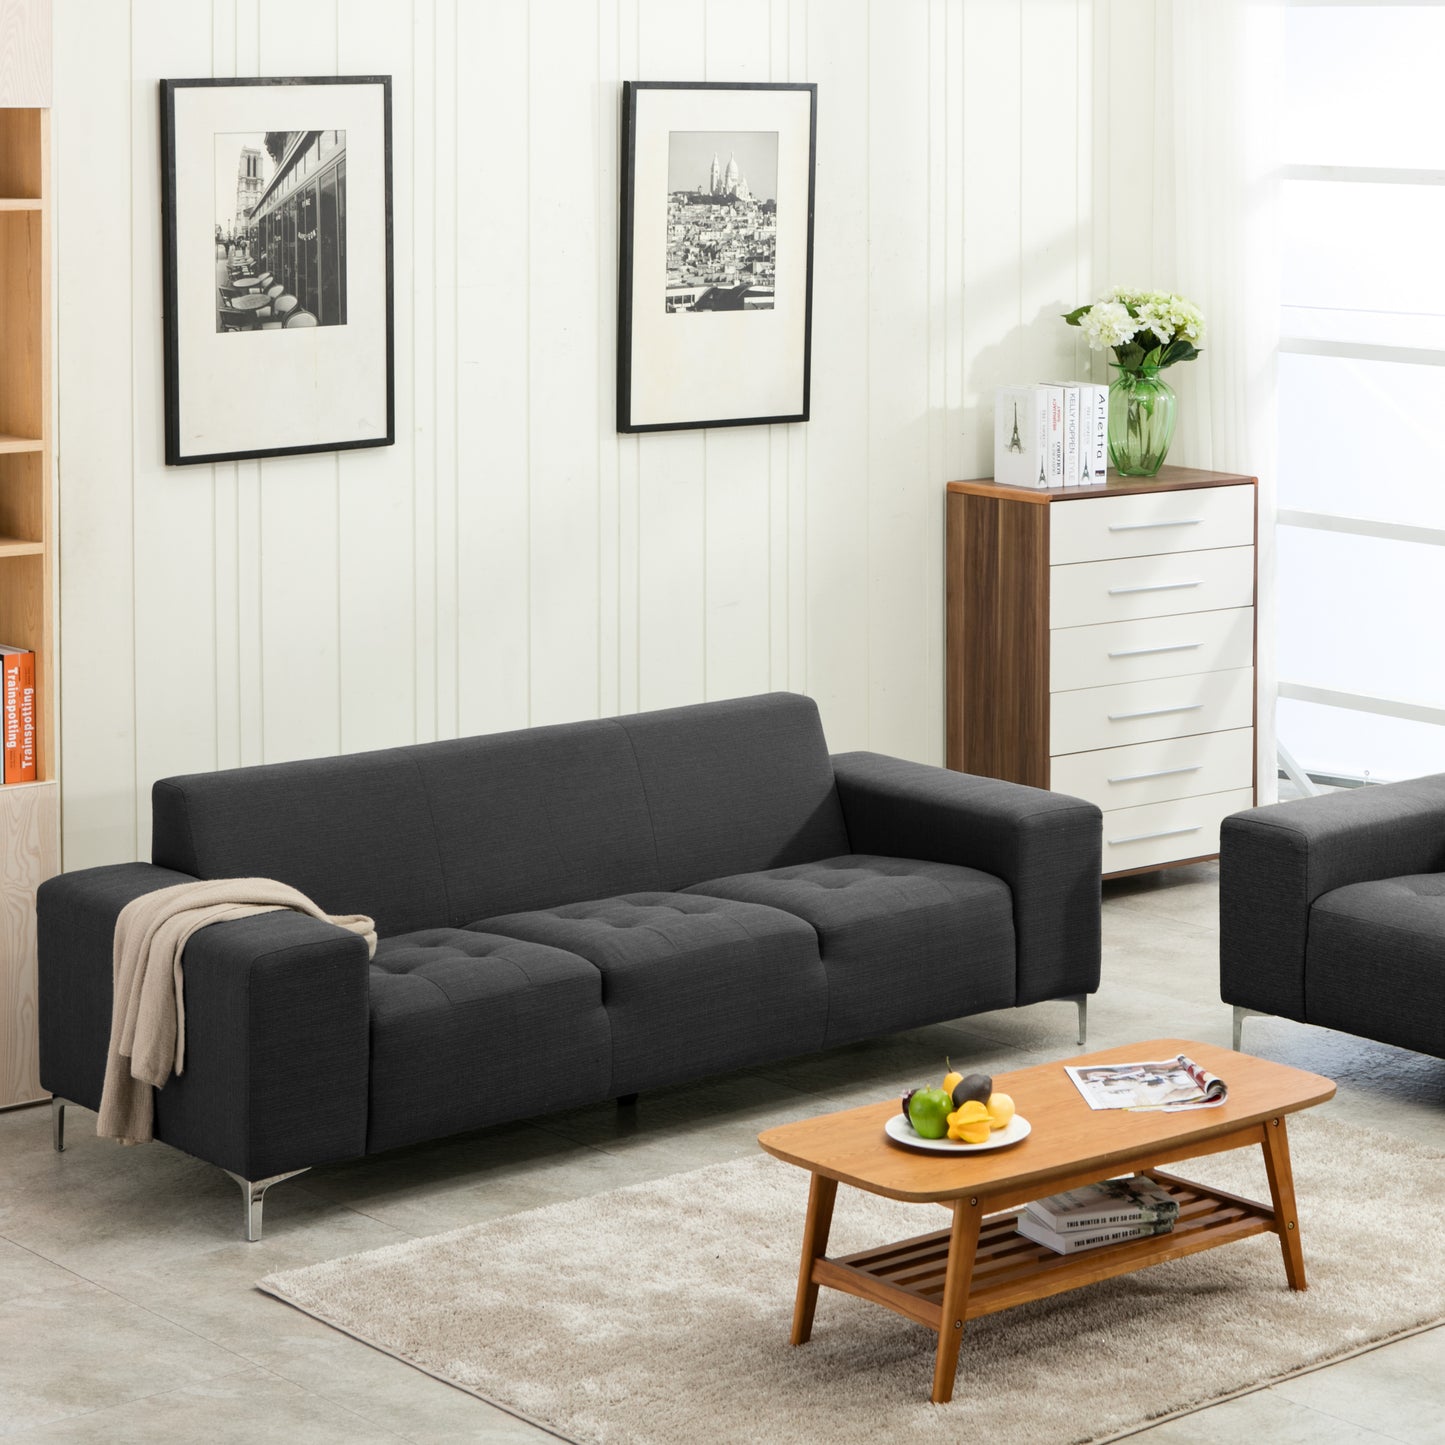 Alicia Modern Charcoal Grey Fabric Sofa with Square Arms